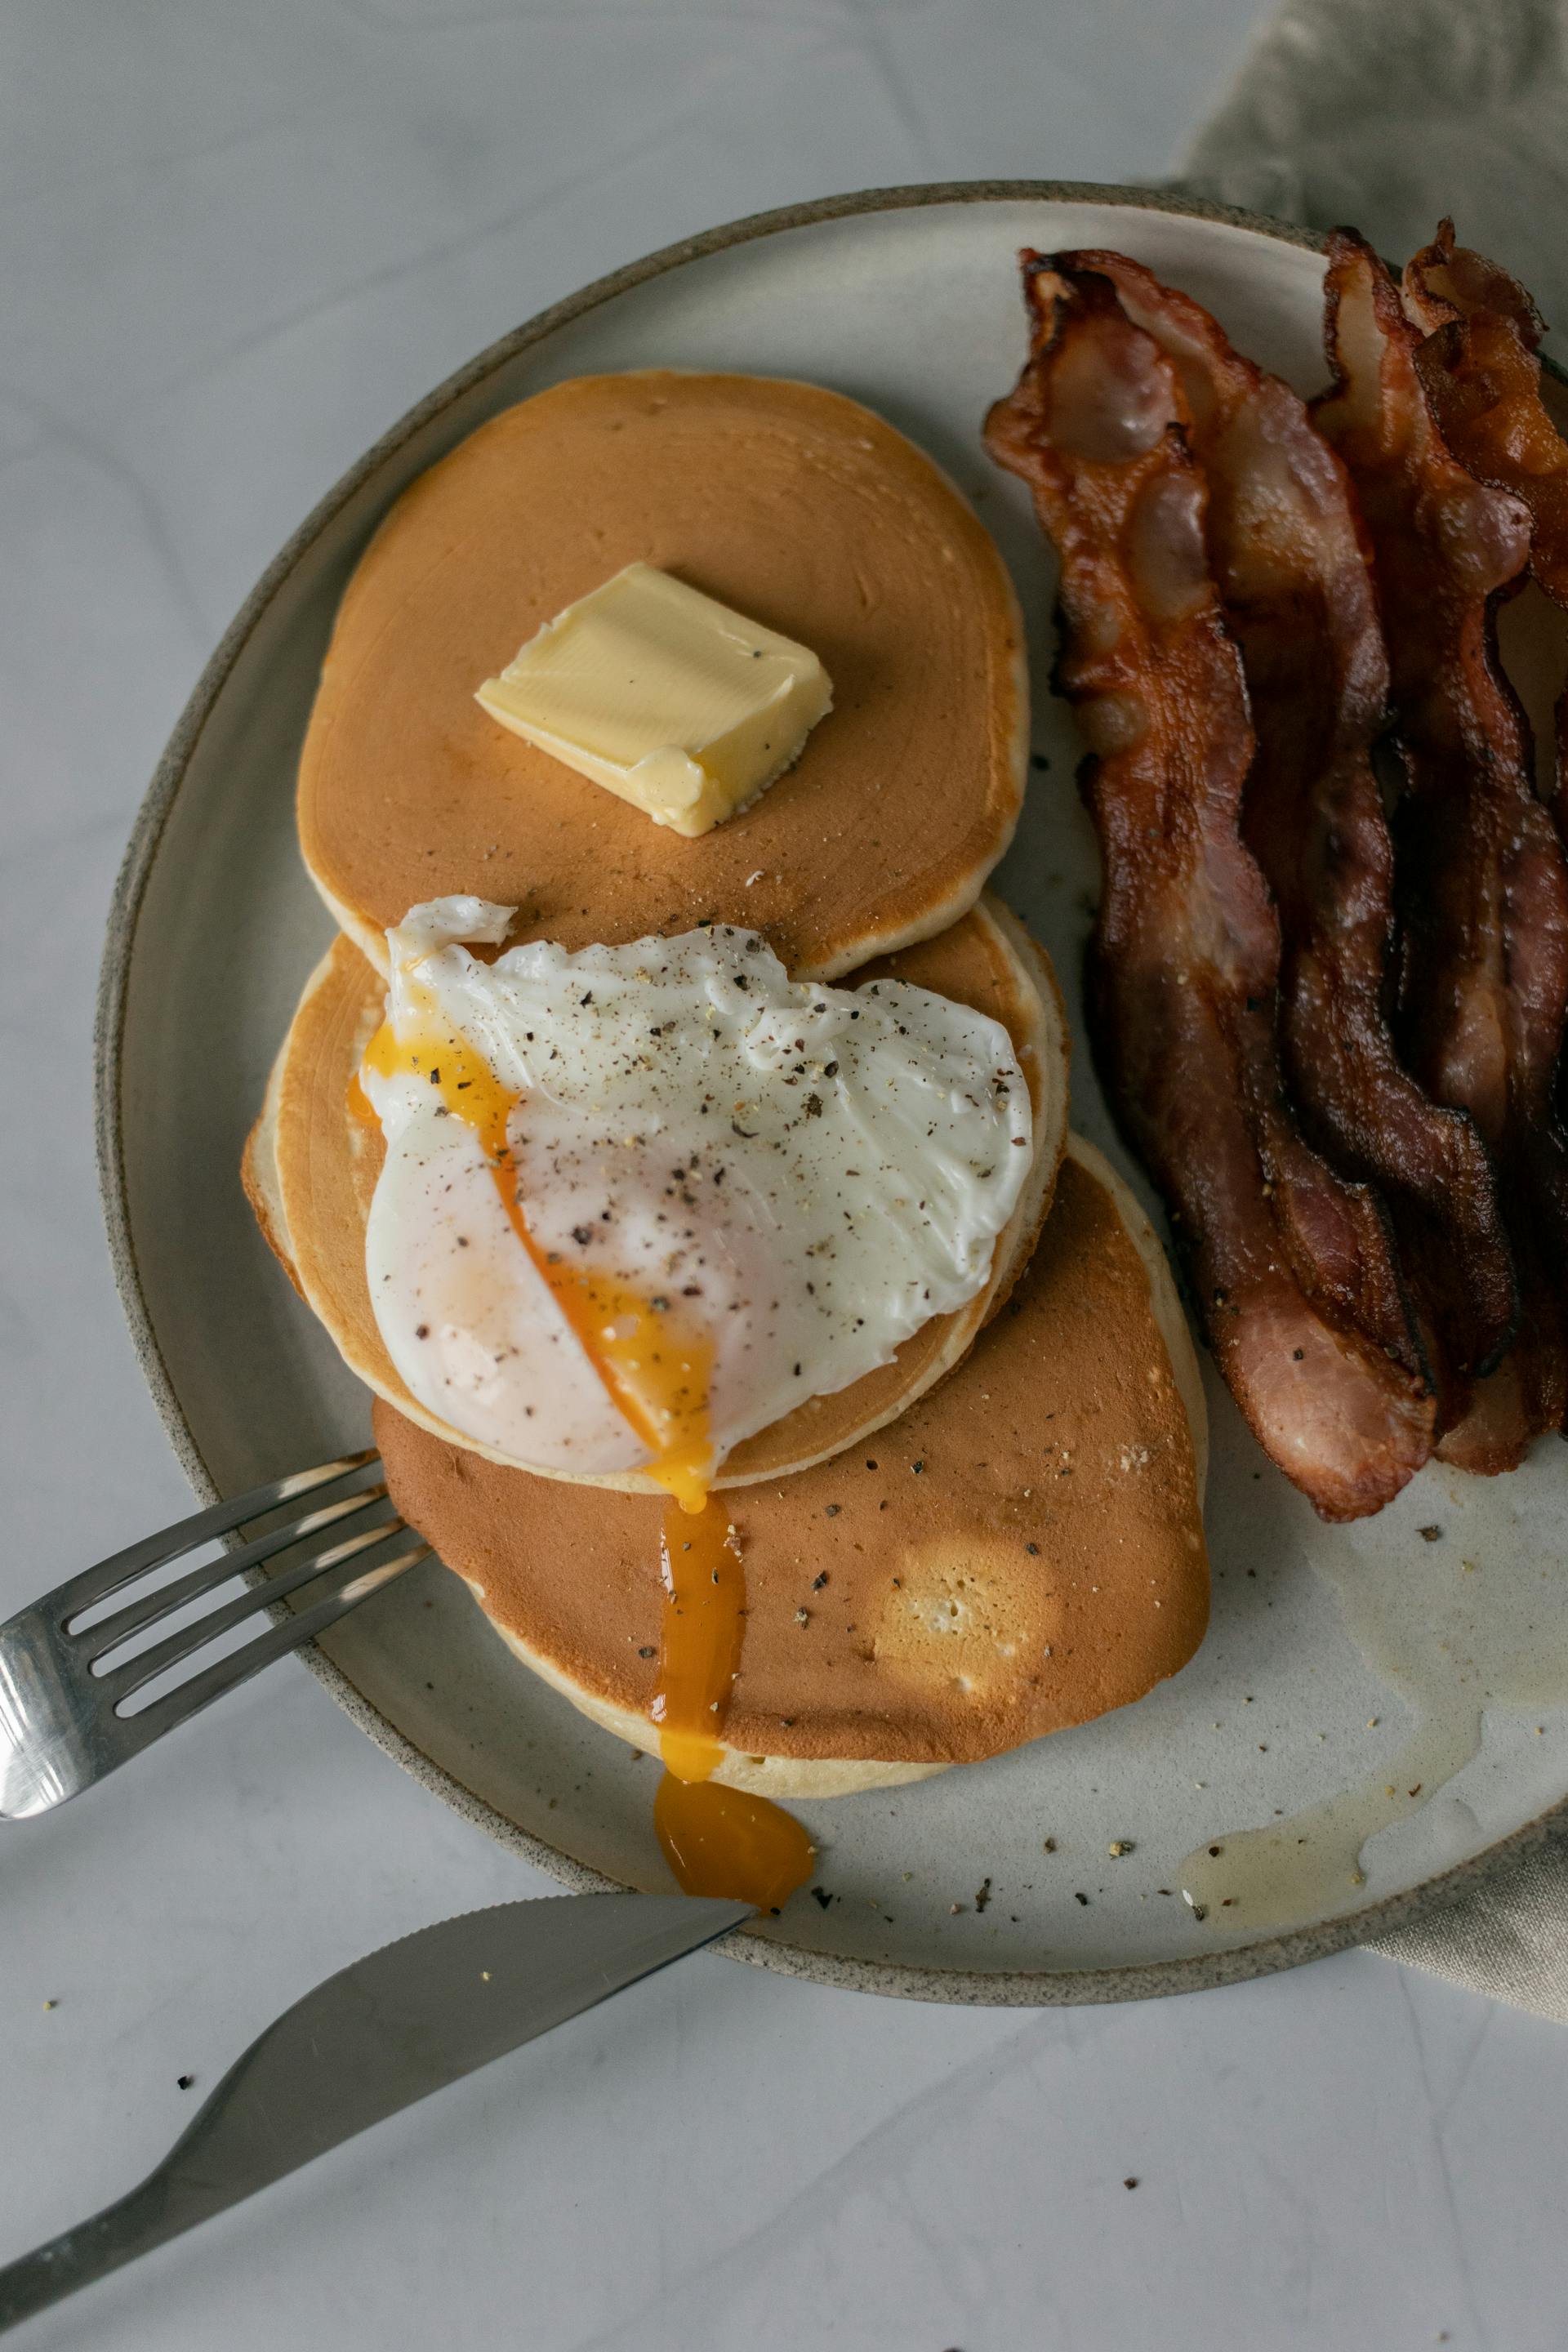 Pancakes with bacon and eggs | Source: Pexels